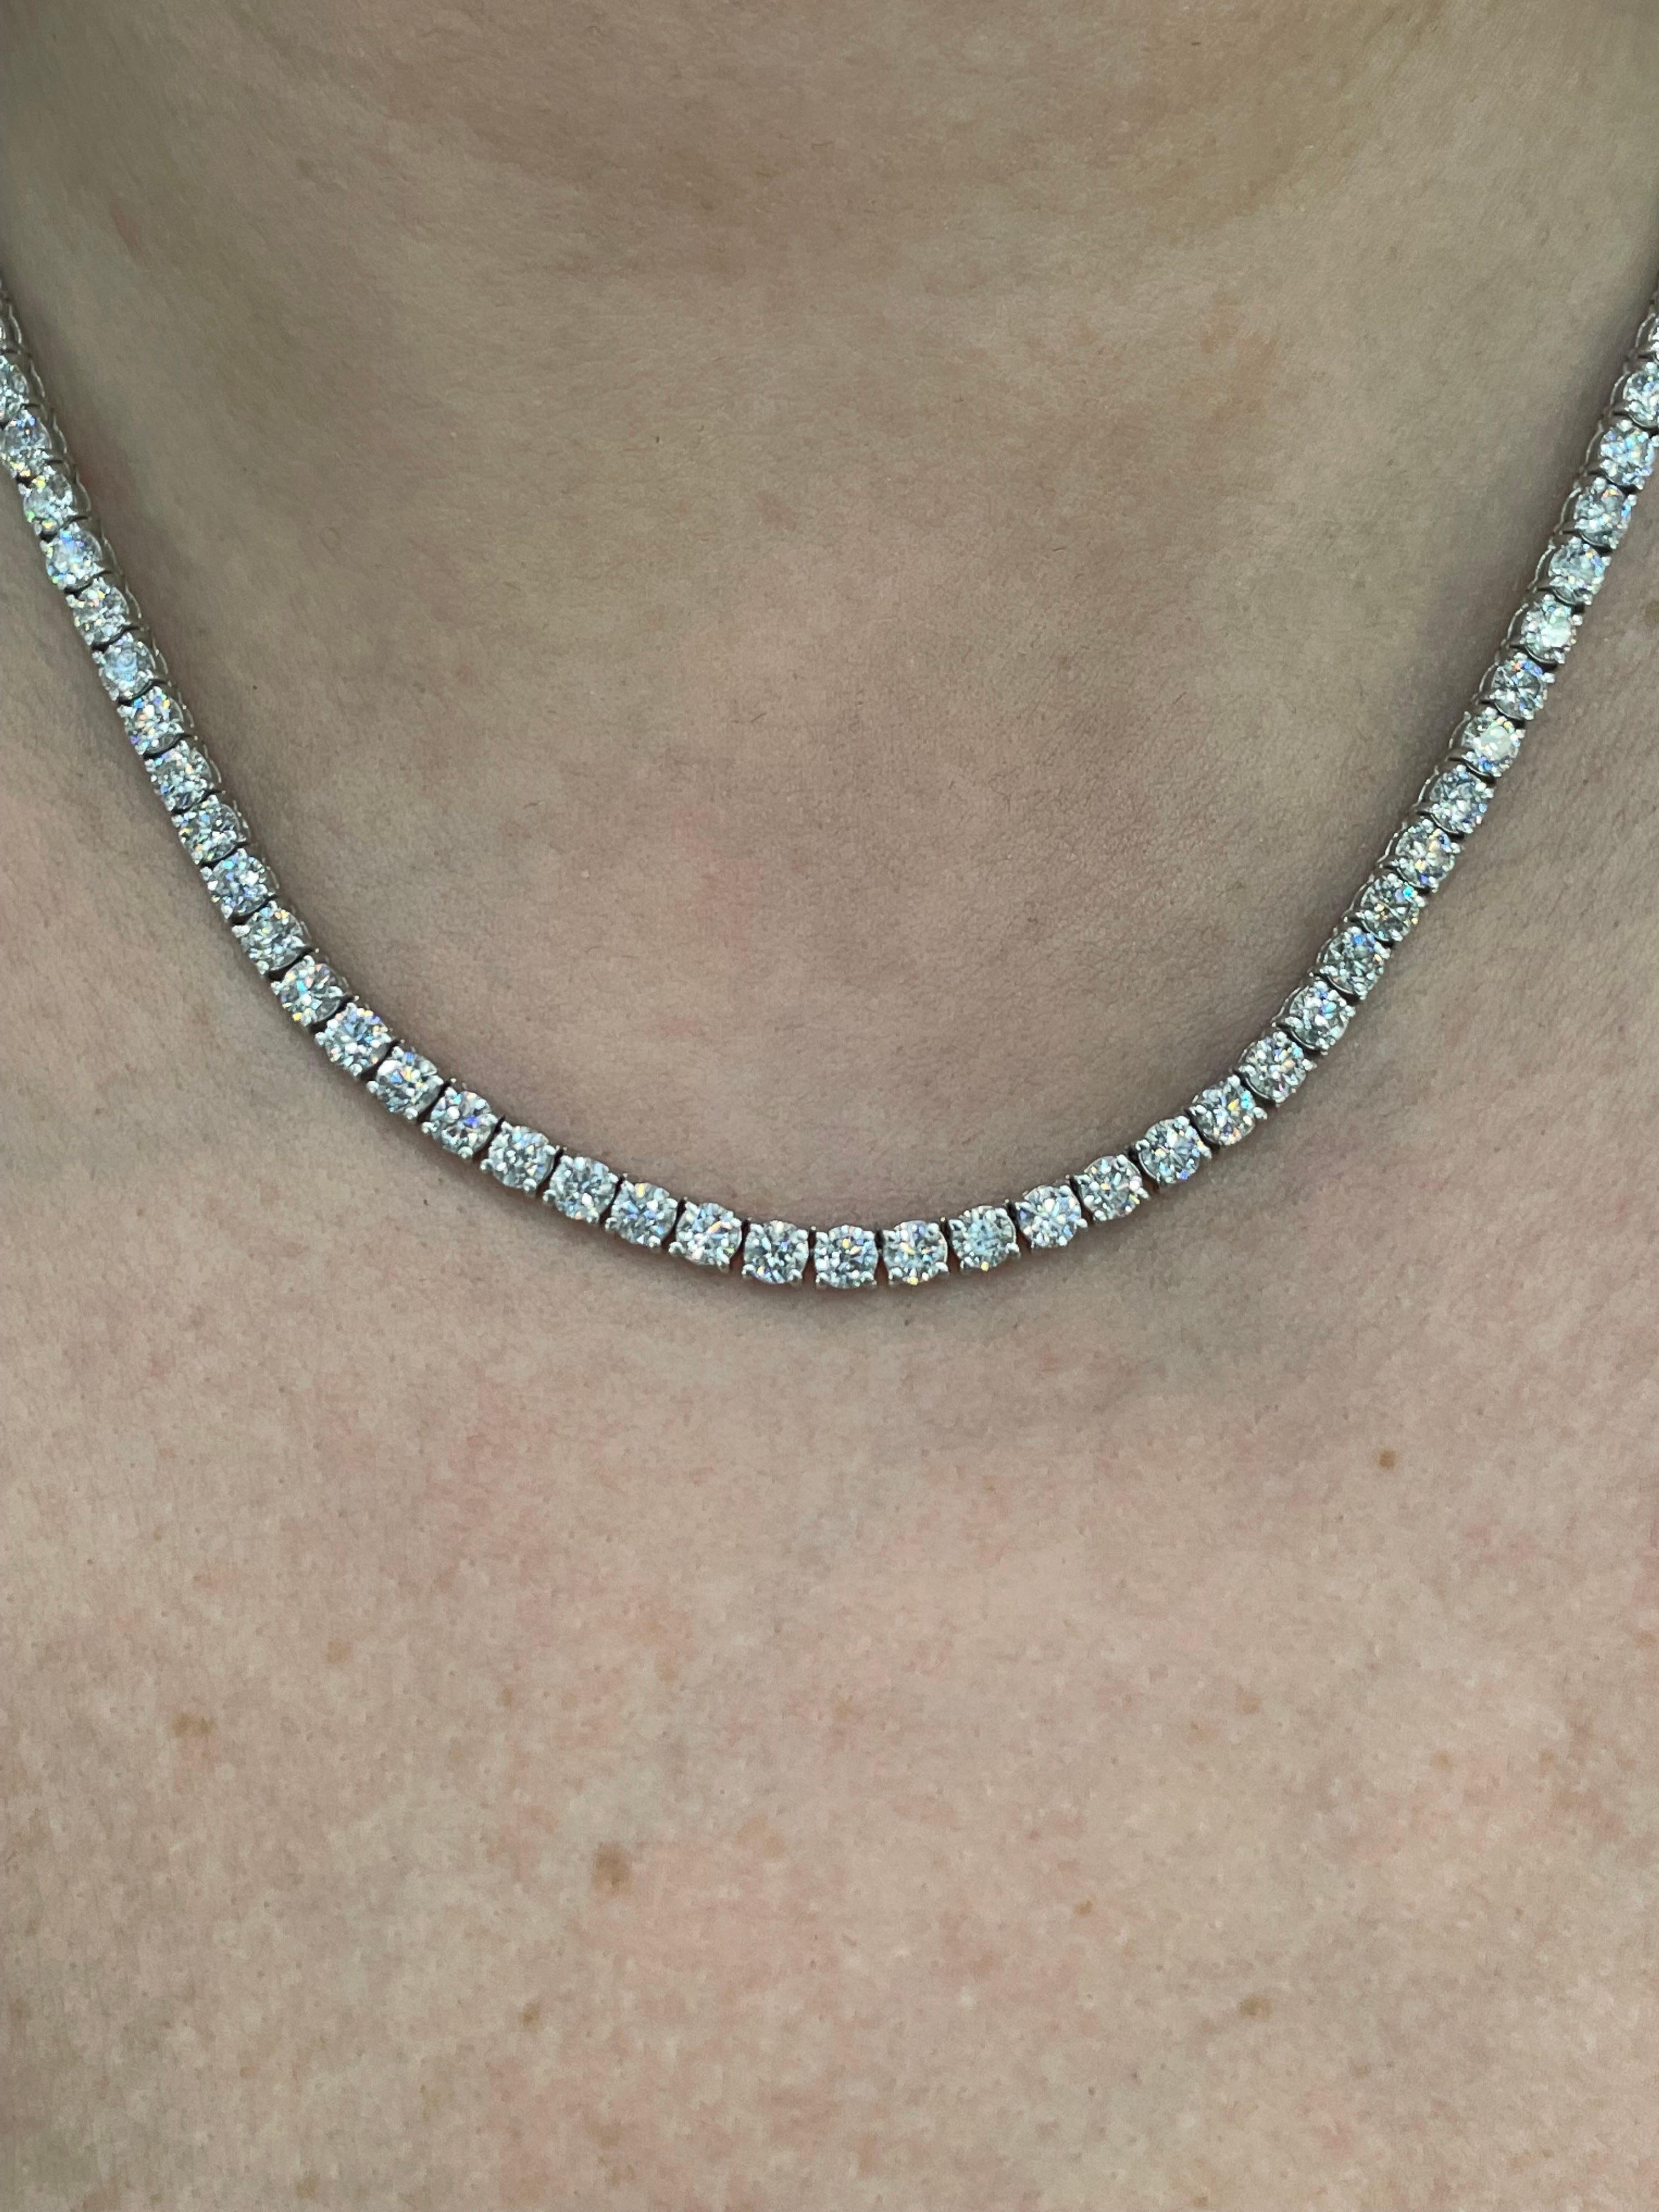 Women's Diamonds Straight Line Necklace 17.25 Carats 14k White Gold 0.15 PTS For Sale